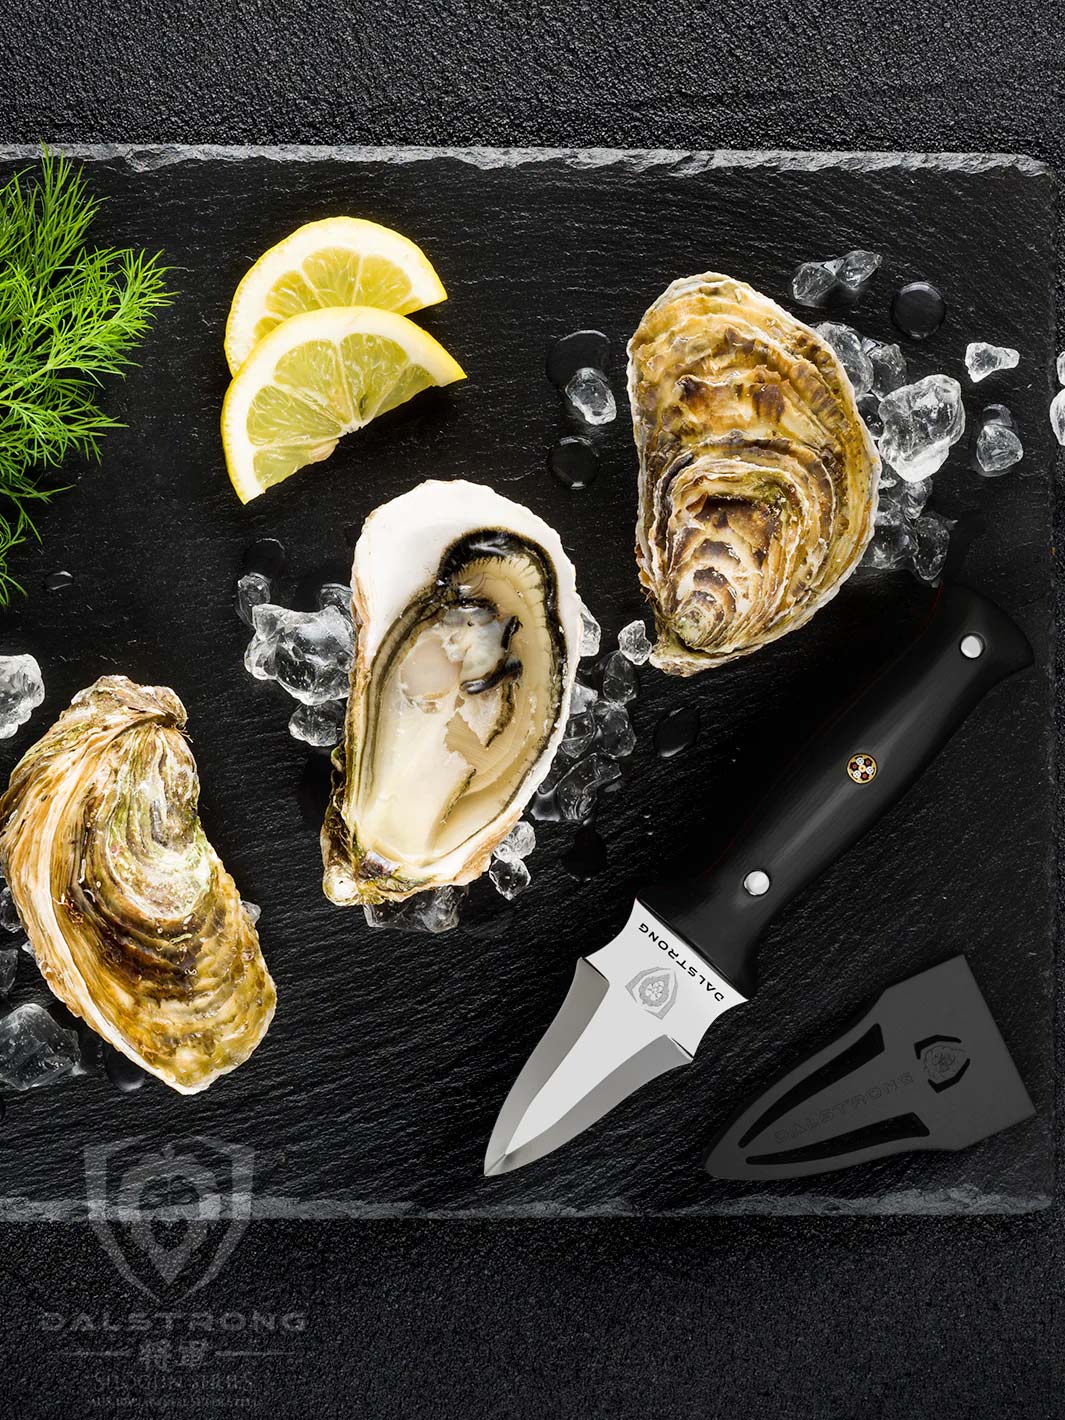 Professional Oyster & Clam Shucking Knife 3.5" | Shogun Series ELITE | Dalstrong ©